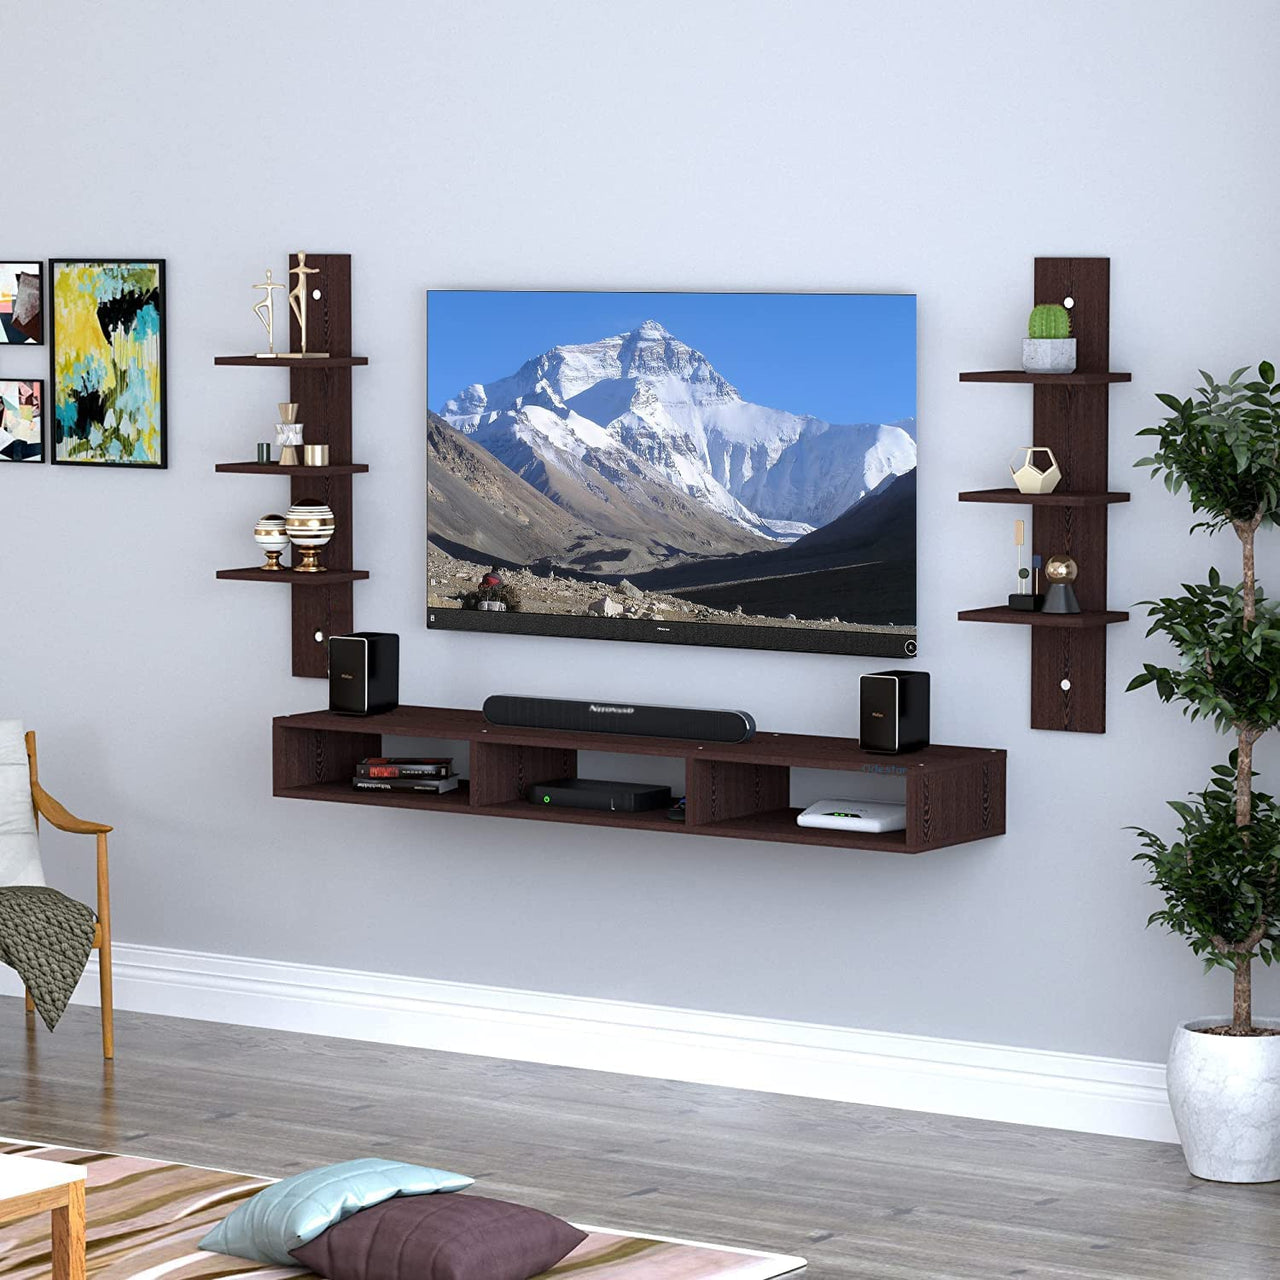 Dime Store Wooden Foldable Wall Mounted TV Unit, Cabinet, with TV Stand Unit Wall Shelf for Living Room Wall Set Top Box Shelf Stand/TV Cabinet for Wall/Set Top Box Holder for Home/Living Room Ideal for TV Dime Store